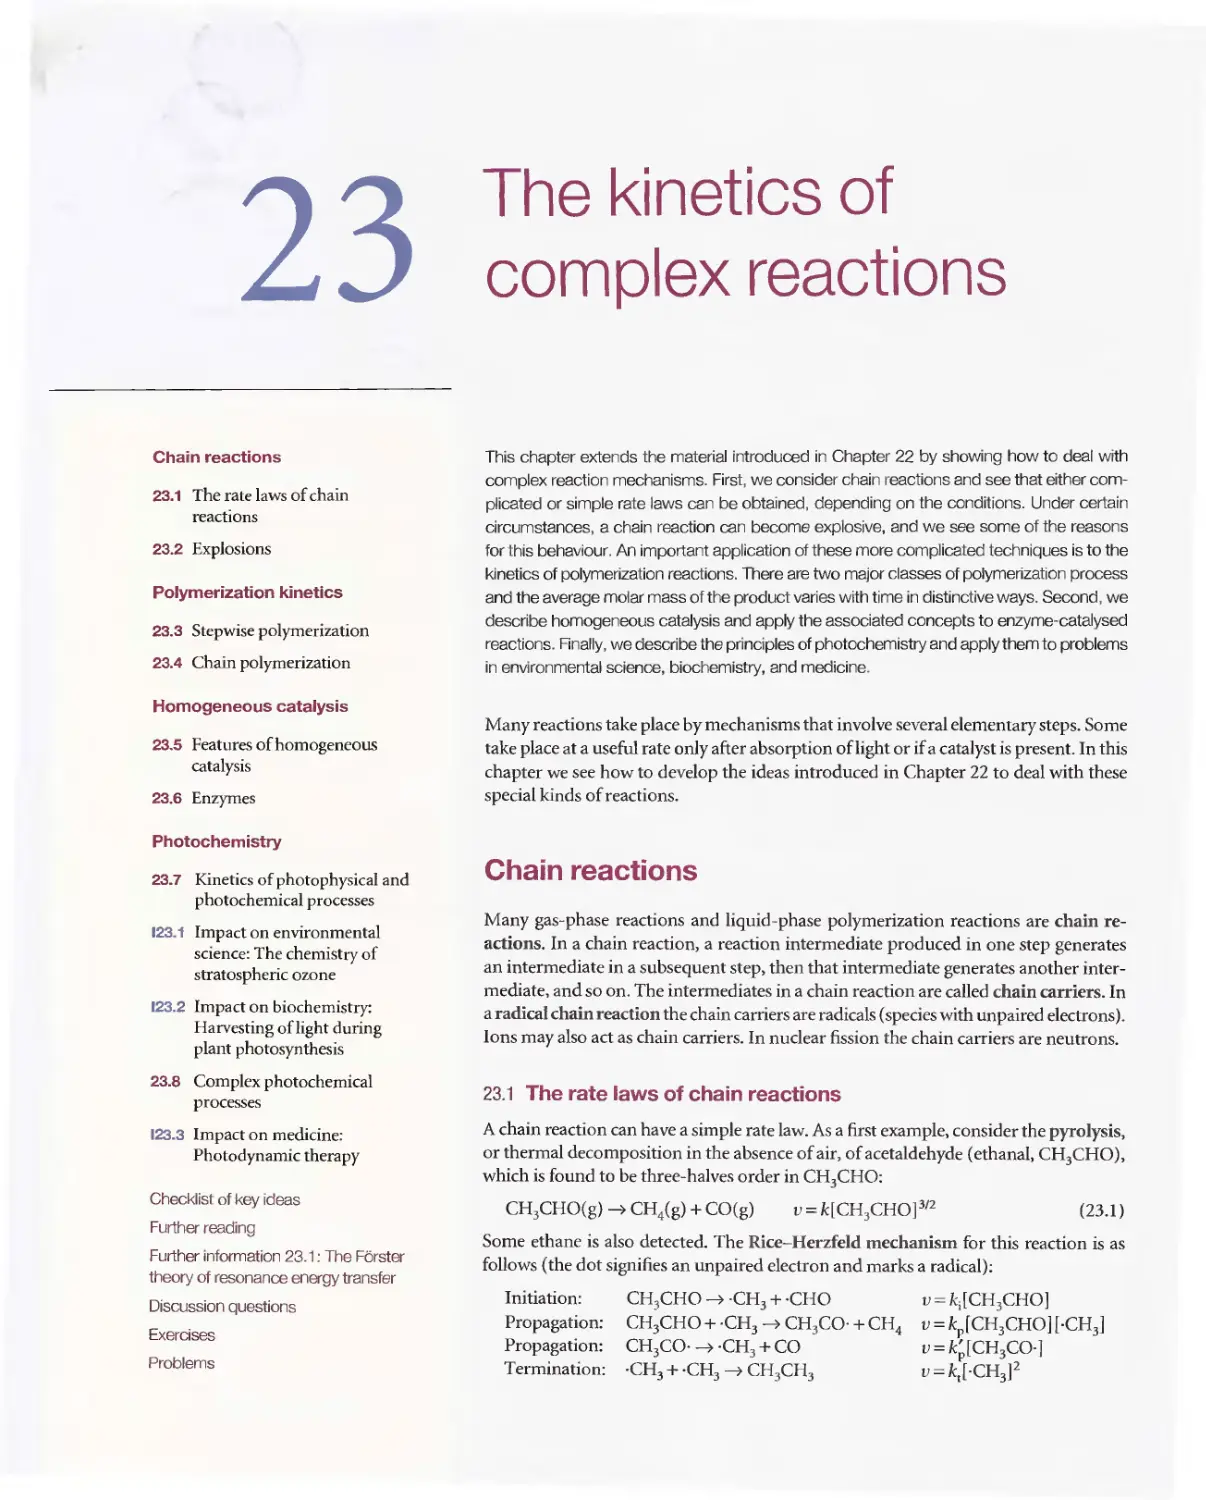 23 - The kinetics of complex reactions